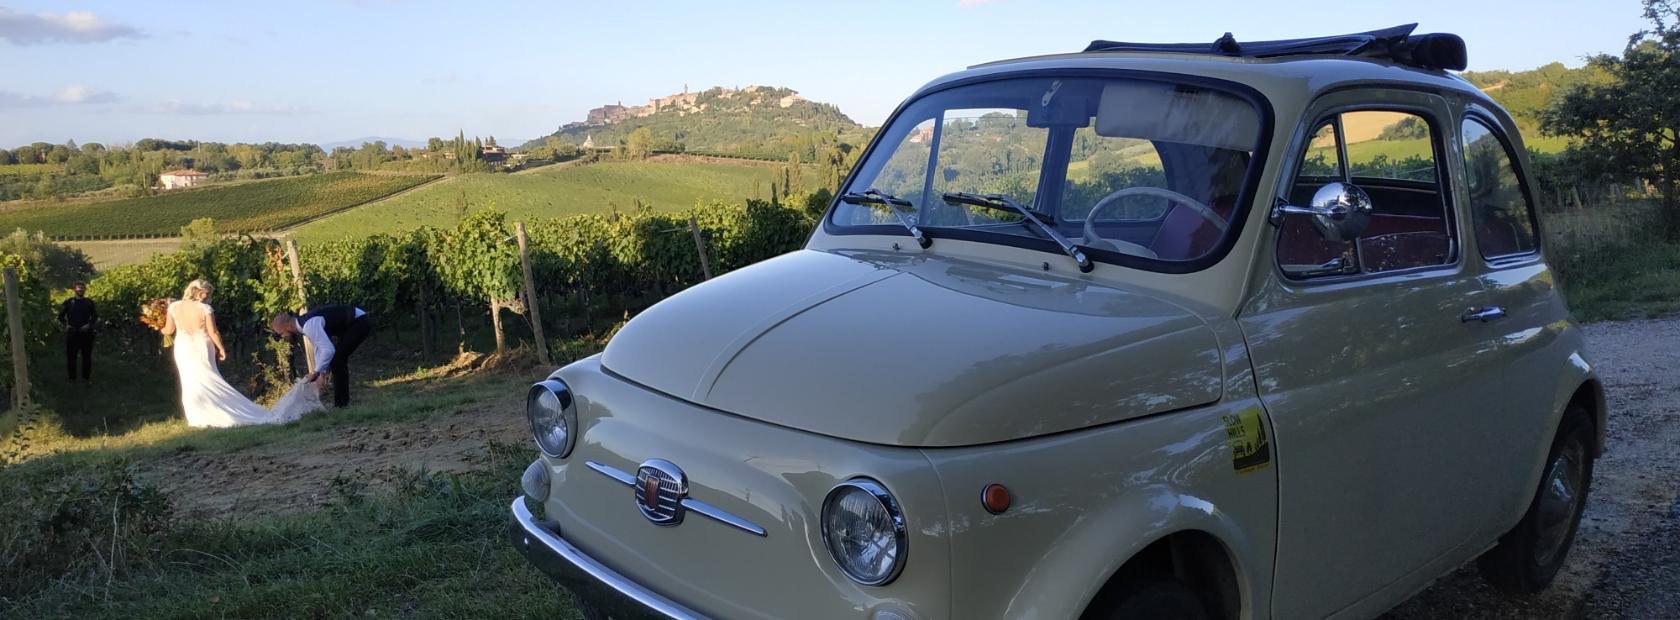 Vintage Fiat 500 rental for weddings and tours in Siena and Valdorcia